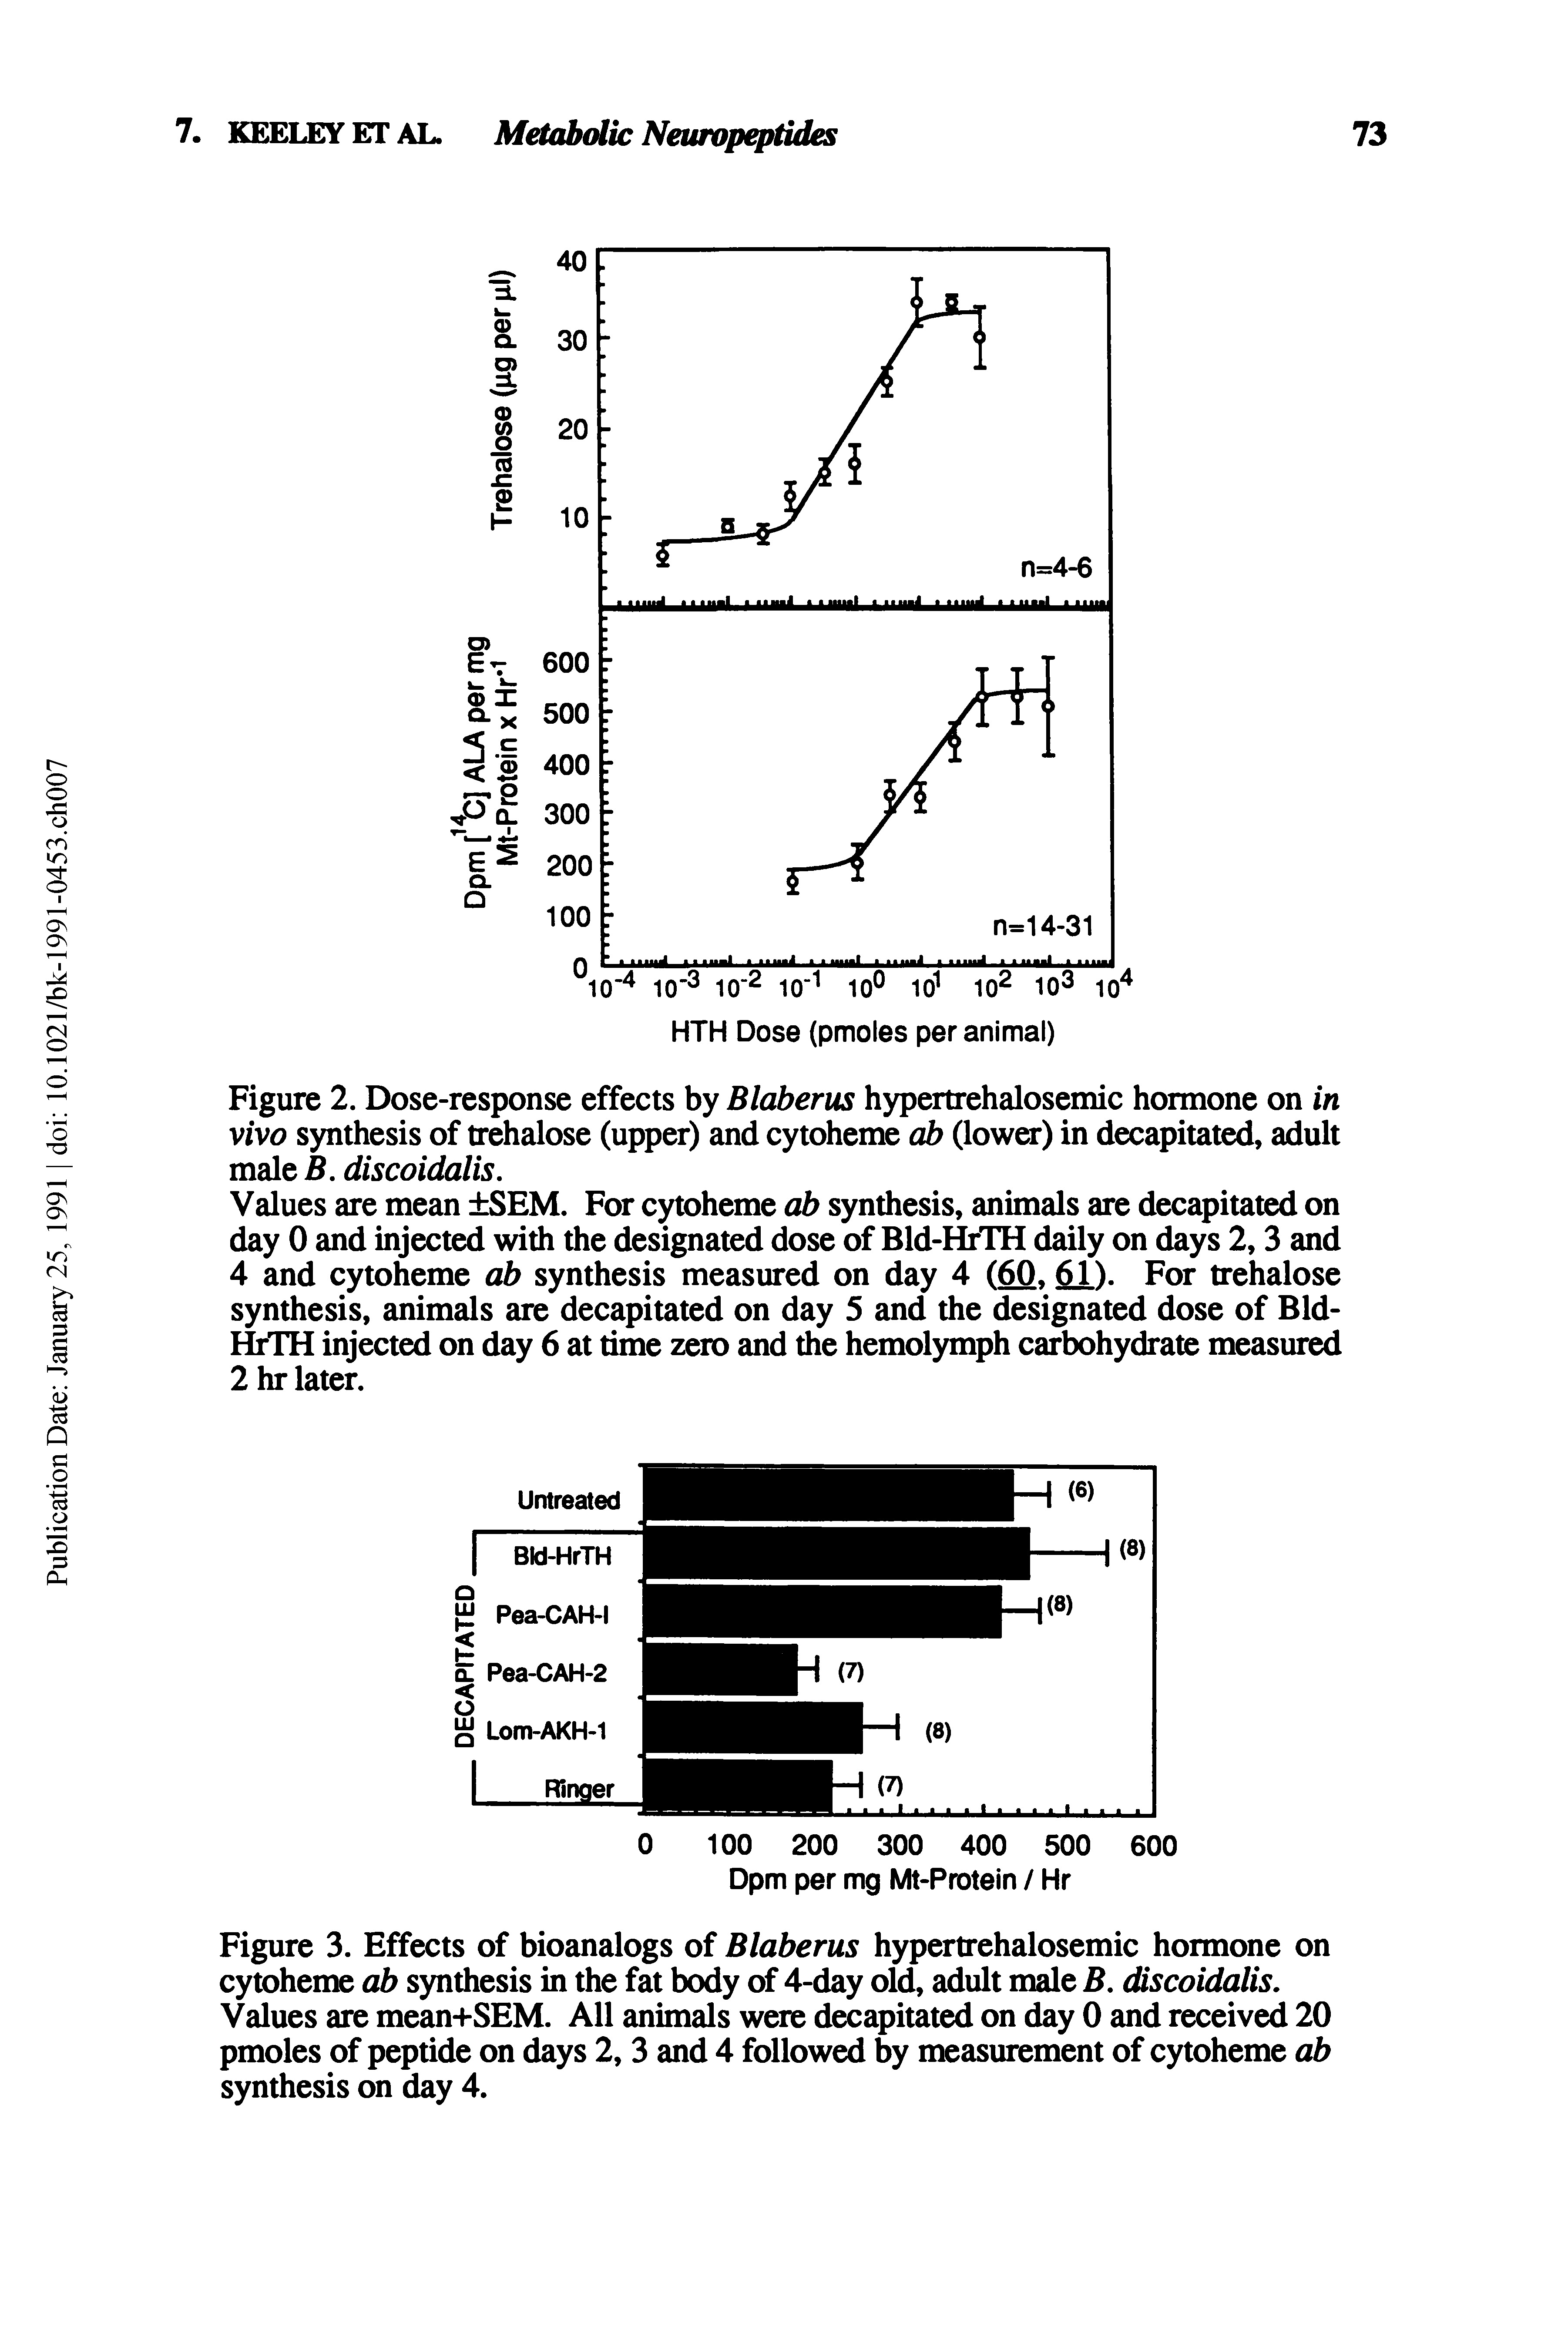 Figure 3. Effects of bioanalogs of Blaberus hypertrehalosemic hormone on cytoheme ab synthesis in the fat body of 4-day old, adult male B, discoidalis. Values are mean+SEM. All animals were decapitated on day 0 and received 20 pmoles of peptide on days 2,3 and 4 followed by measurement of cytoheme cb synthesis on day 4.